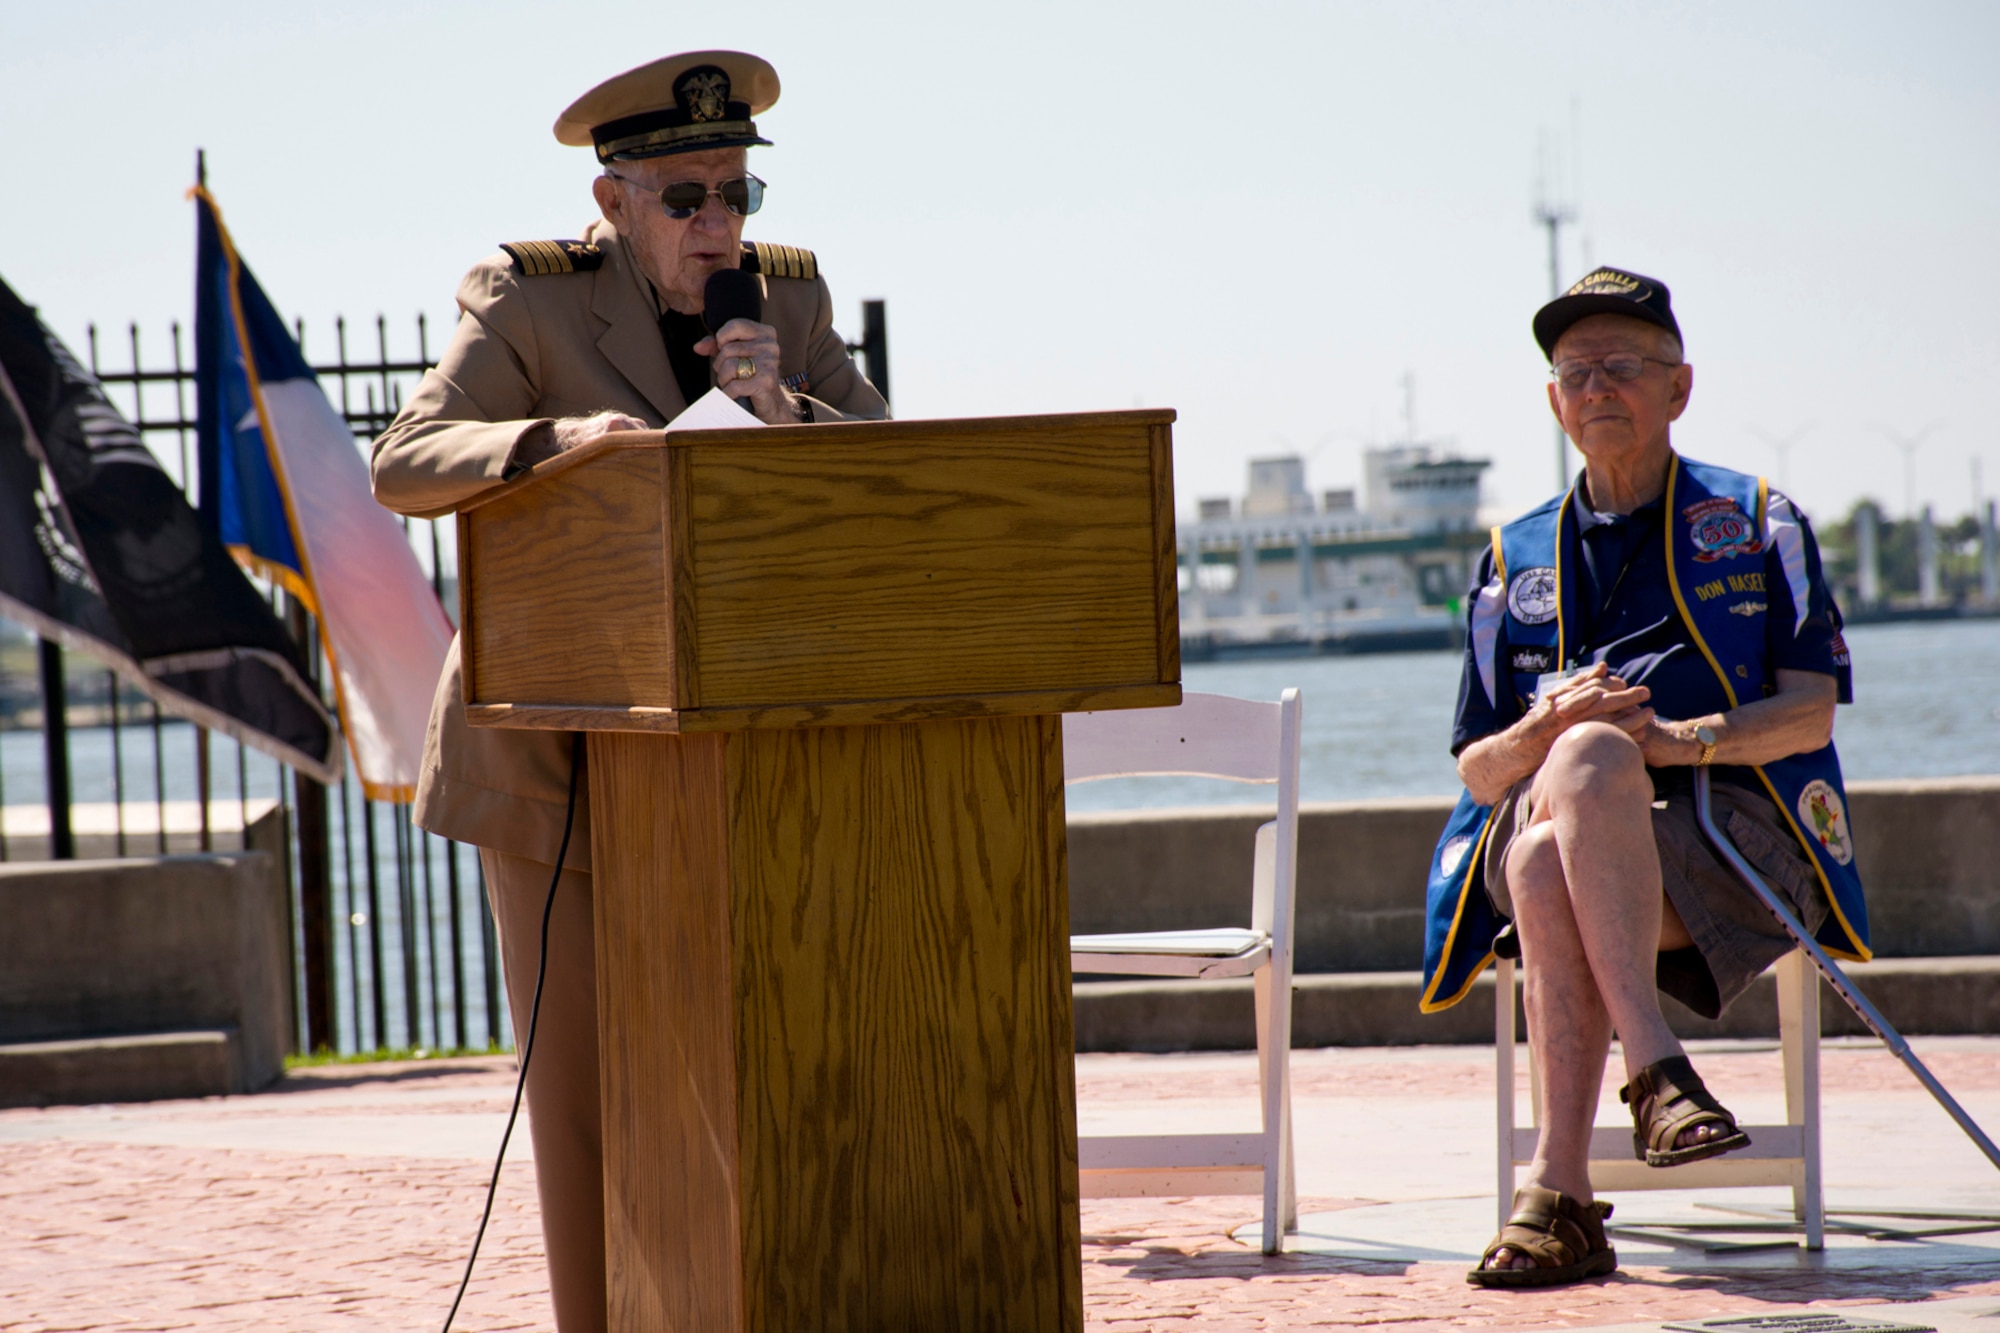 Retired U.S. Navy Capt. Zeke Zellmer, speaks during the “All Cavalla Reunion Memorial Service” at Seawolf Park in Galveston, Texas, Apr. 23, 2016. The bi-annual reunion is an opportunity for former crewmembers of the USS Cavalla SS - SSK - AGSS – 244 and USS Cavalla (SSN 684) to reconnect with each other, make new friends, share sea stories and honor the memory of those submariners who have passed. U.S. Air Force Reserve Master Sgt. Jeff Walston, a public affairs technician assigned to the 913th Airlift Group at Little Rock Air Force Base, Ark., served on the USS Cavalla (SSN 684) from 1977 to 1979, while he was in the U.S. Navy. (Courtesy photo by Eva Walston)